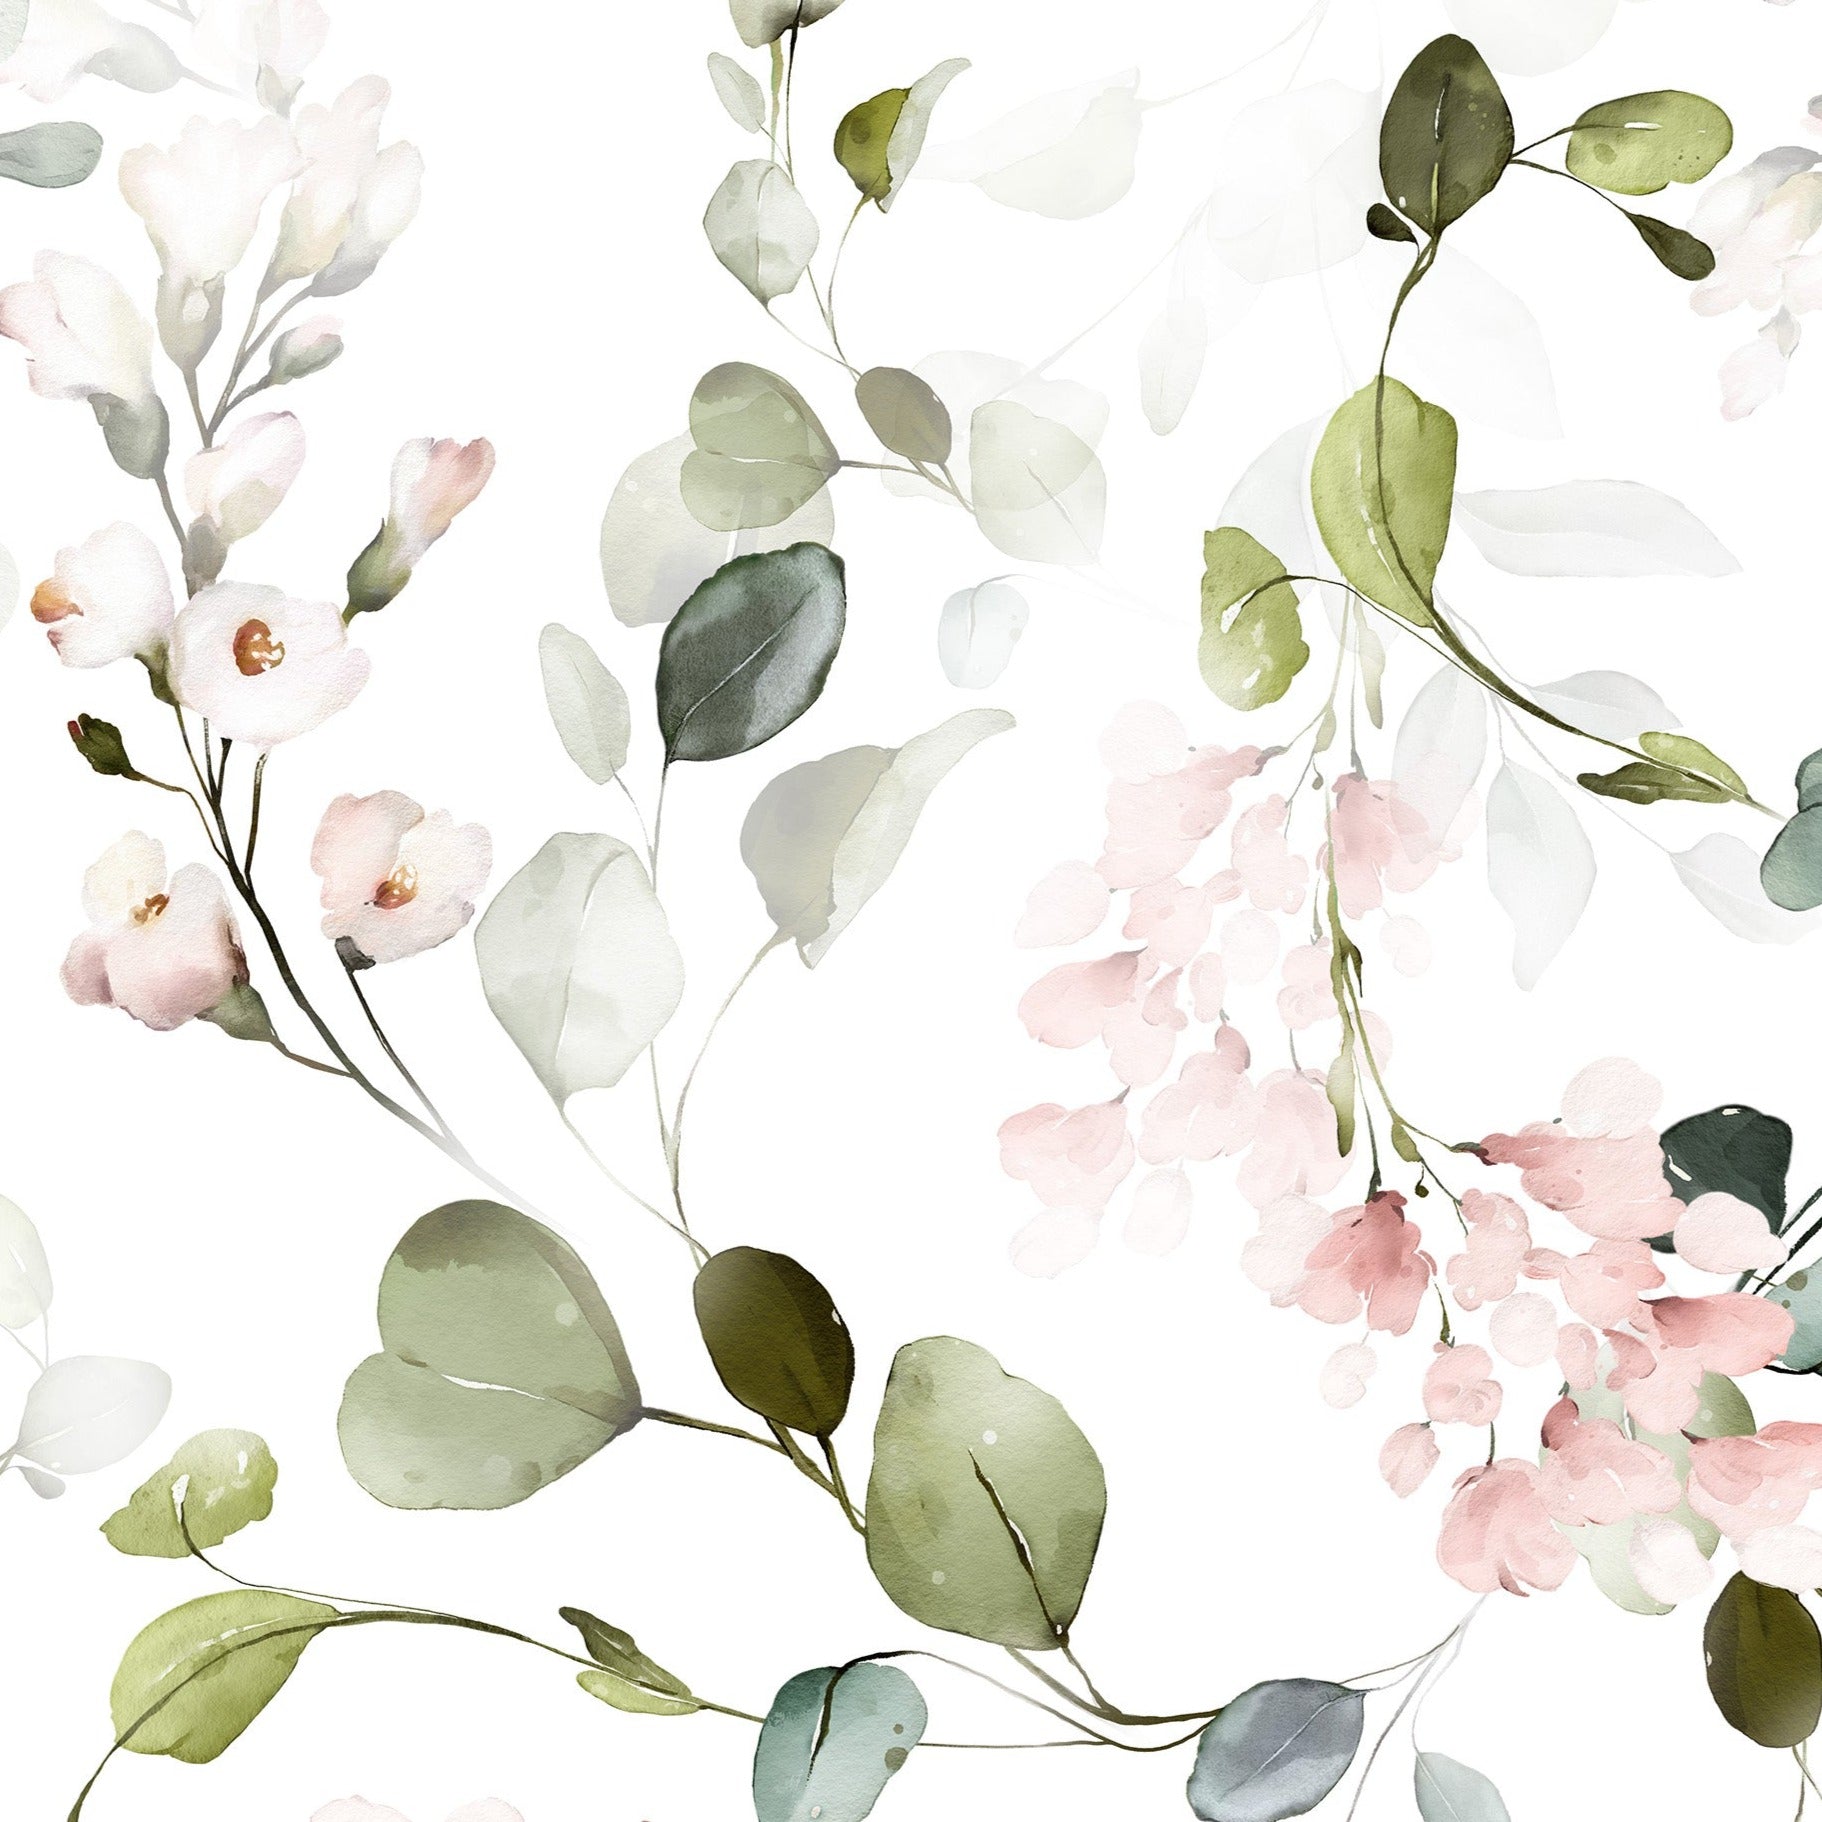 A seamless pattern of the Pink Floral & Herbs Wallpaper featuring watercolor blush pink flowers and green herbs. The delicate and airy design brings a sense of serenity and elegance, perfect for adding a soft, natural touch to any interior.